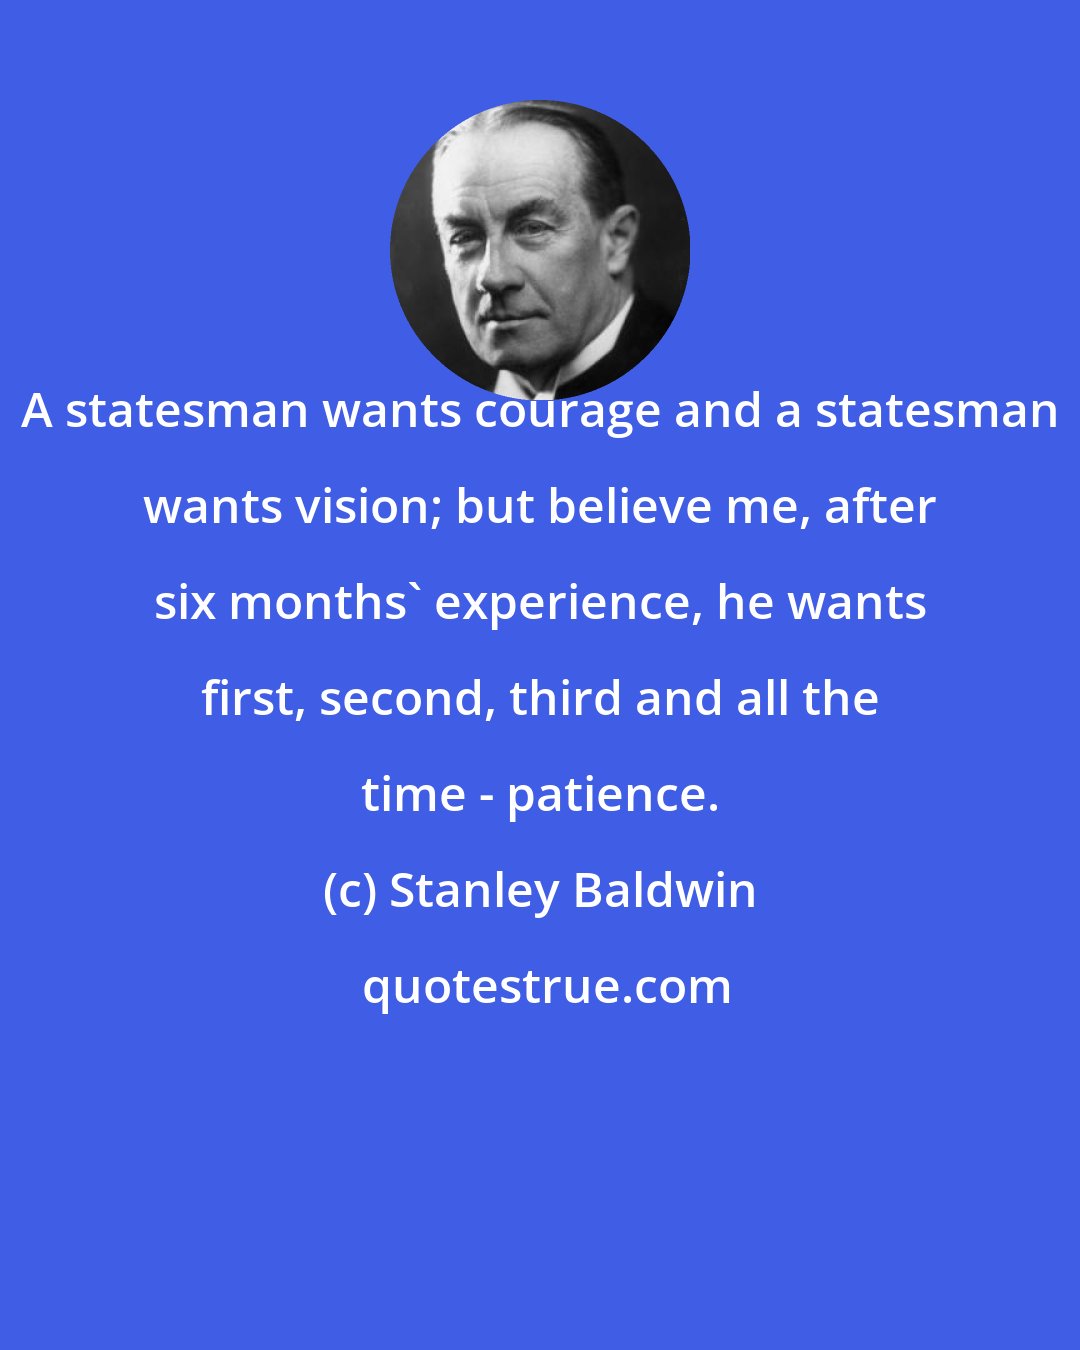 Stanley Baldwin: A statesman wants courage and a statesman wants vision; but believe me, after six months' experience, he wants first, second, third and all the time - patience.